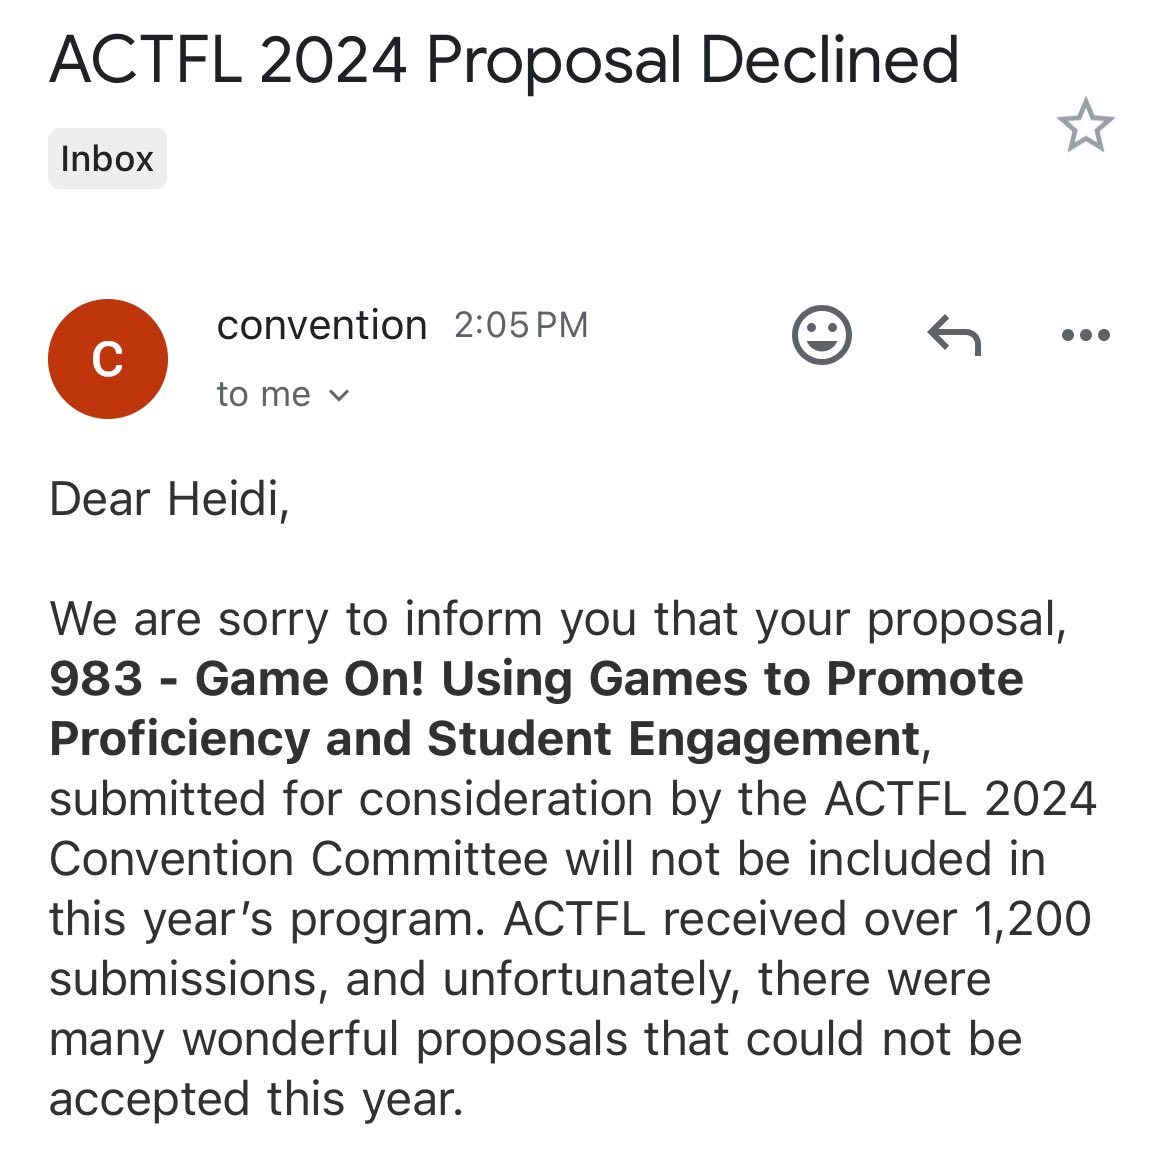 Typically I only share about my acceptances, but we need to normalize both celebrating the joy of acceptances and the disappointment of rejections. #langchat #actfl24